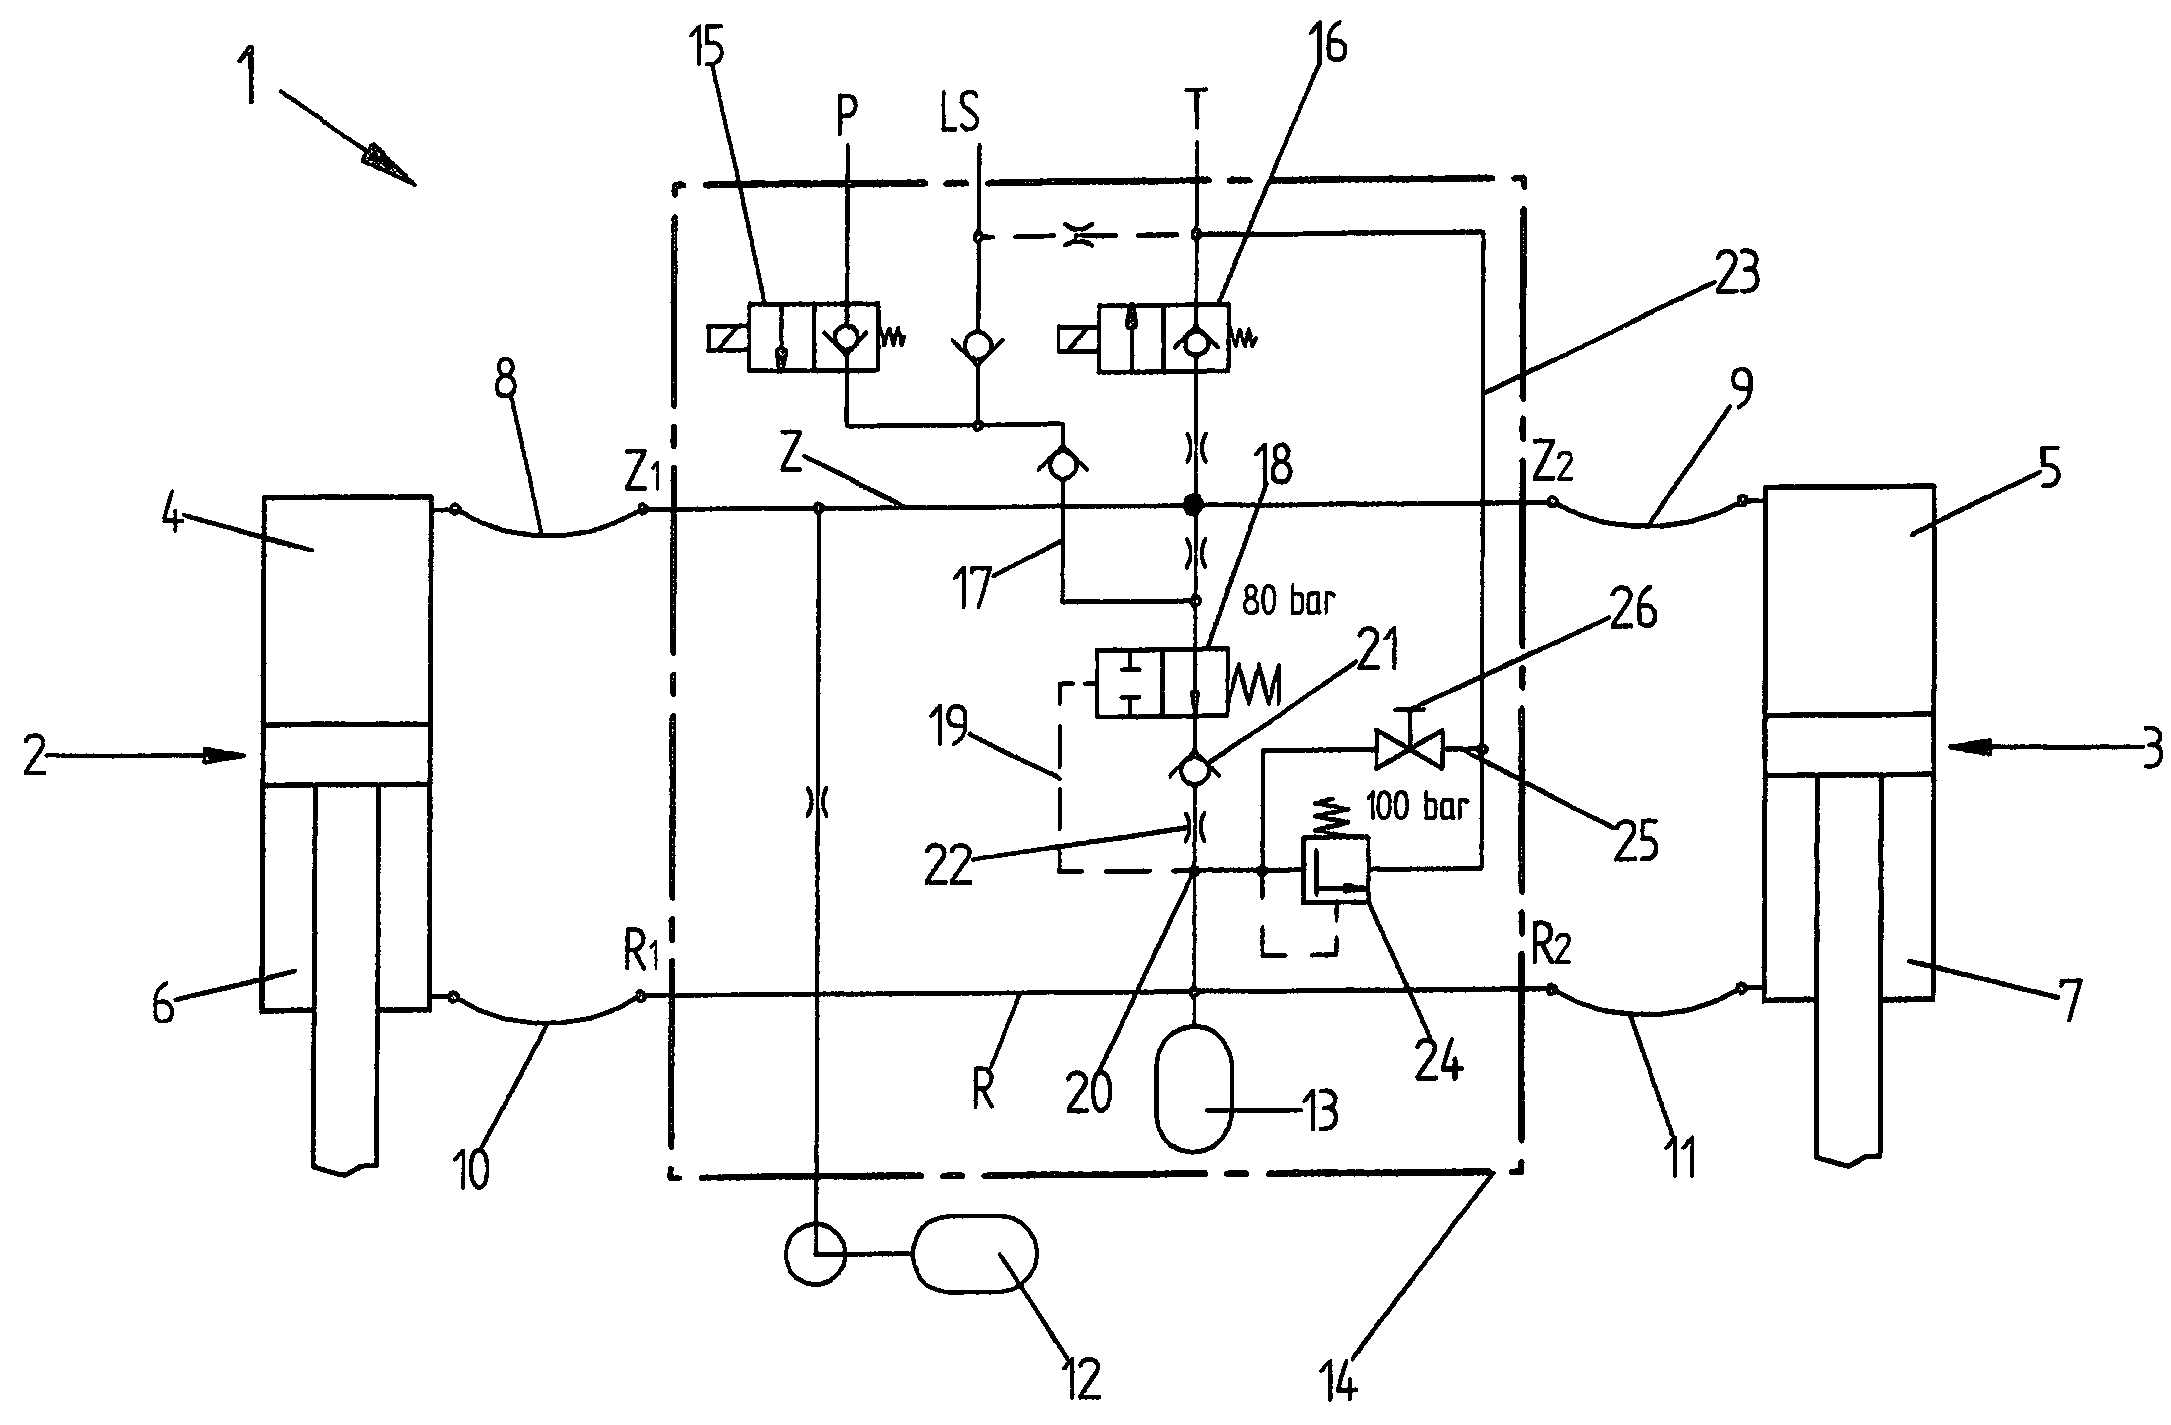 Hydropneumatic suspension system for vehicles